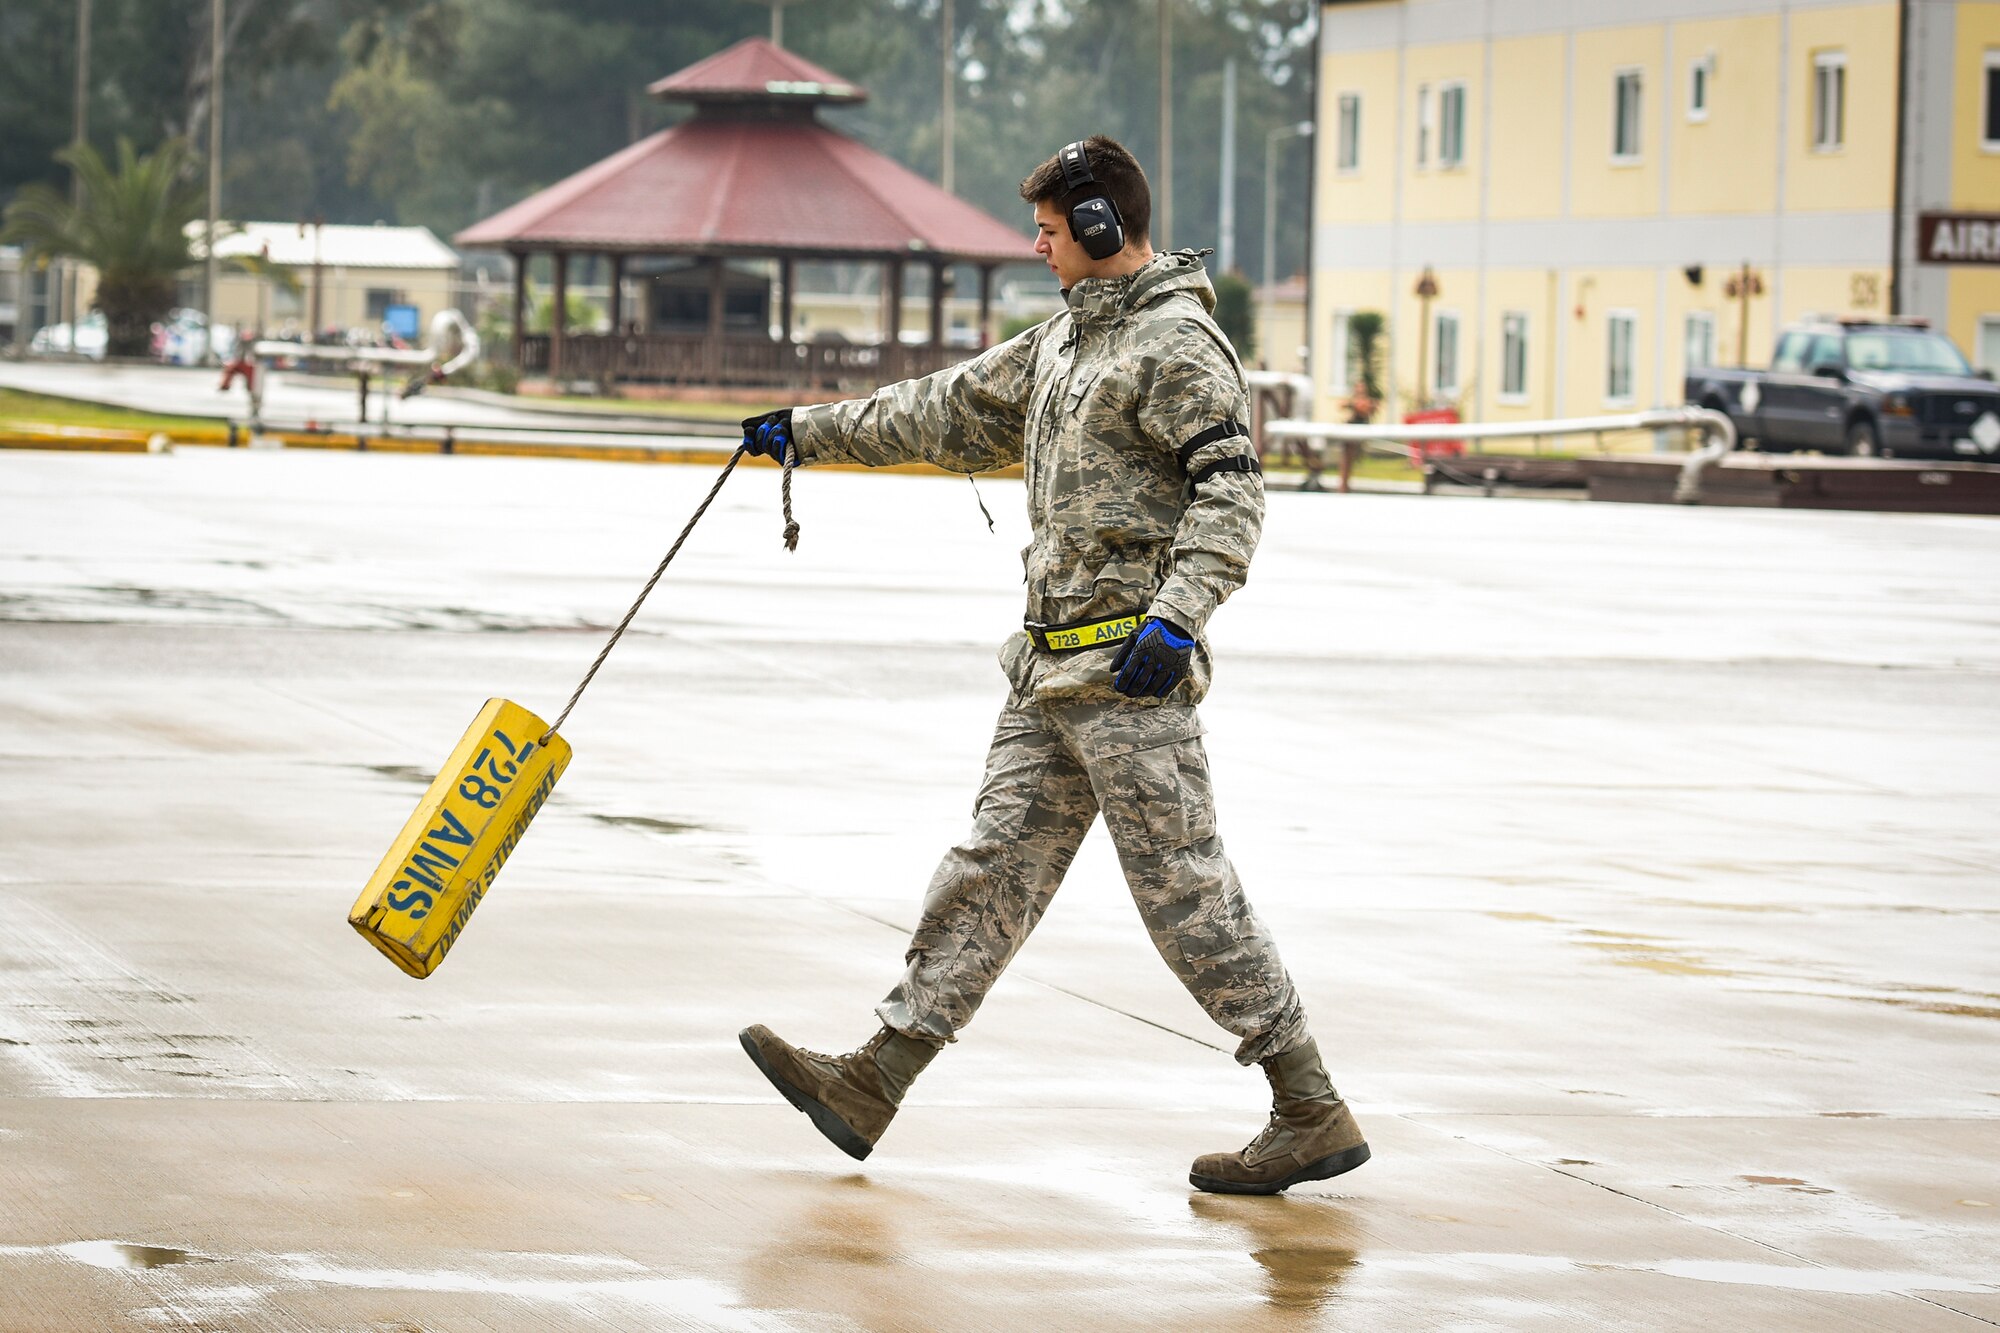 Senior Airman Dane Johnson, 728th Air Mobility Squadron aircraft services journeyman, carries a chock to a K-loader March 3, 2019, at Incirlik Air Base, Turkey. The ramp services section is responsible for offloading all cargo from the aircraft. (U.S. Air Force photo by Staff Sgt. Ceaira Tinsley)